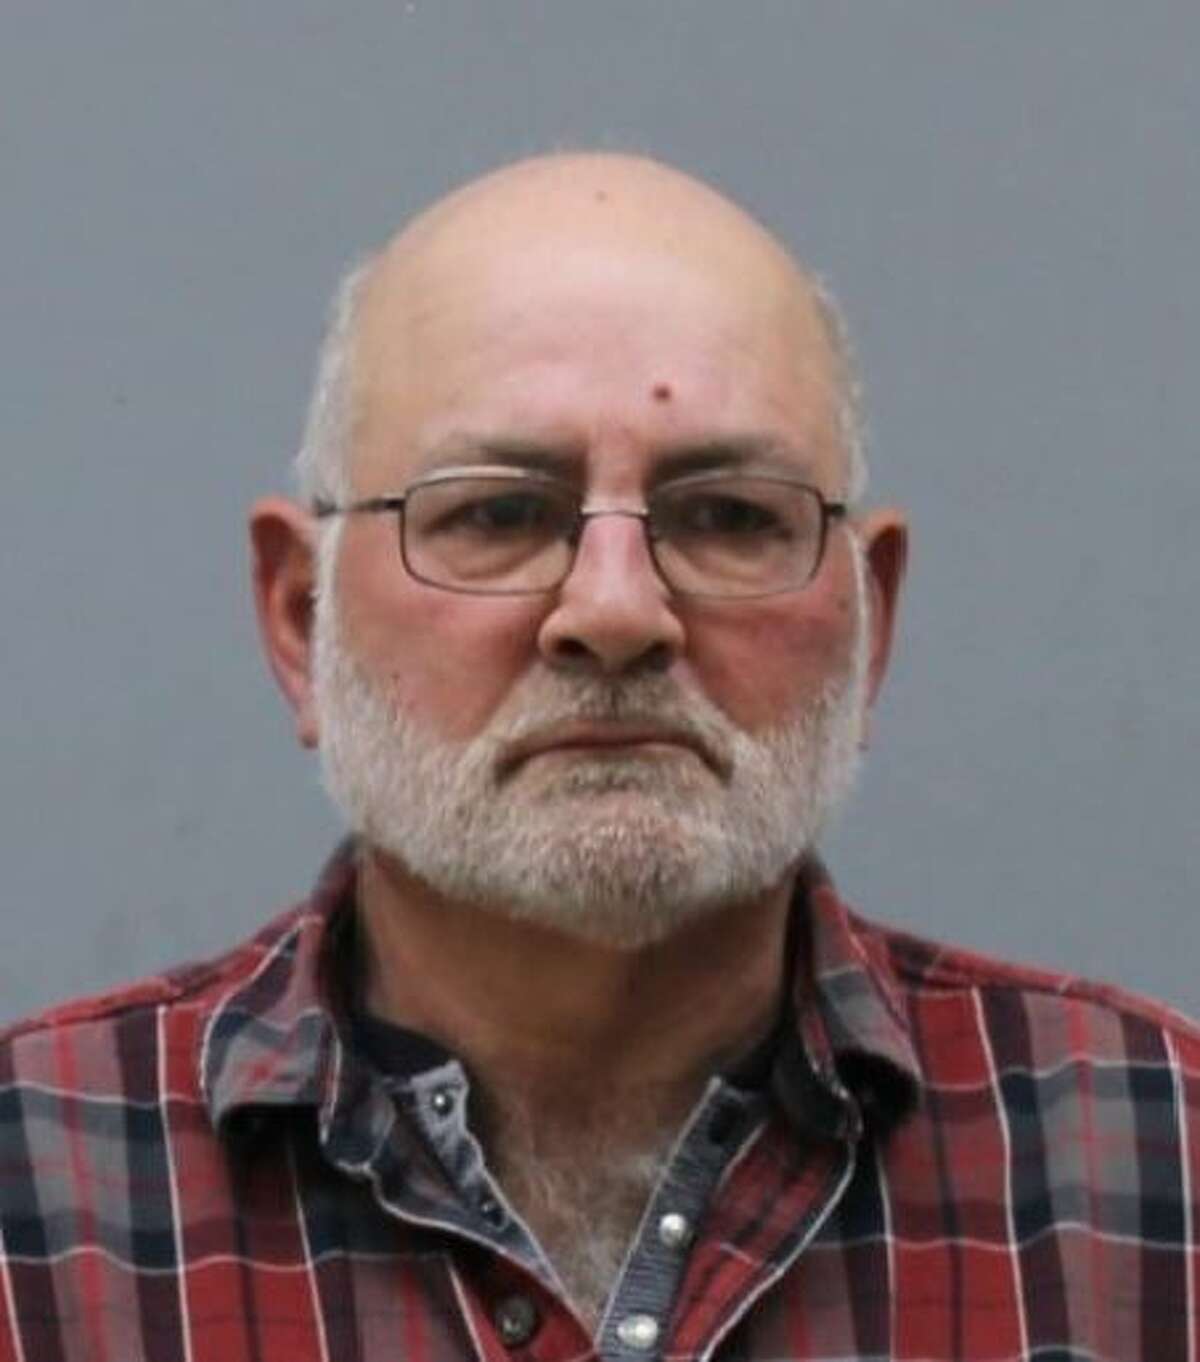 Dennis Botticello, owner of Botticello Inc of Manchester, was arrested Friday in connection with a deadly trench collapse in Vernon last year, police say. 